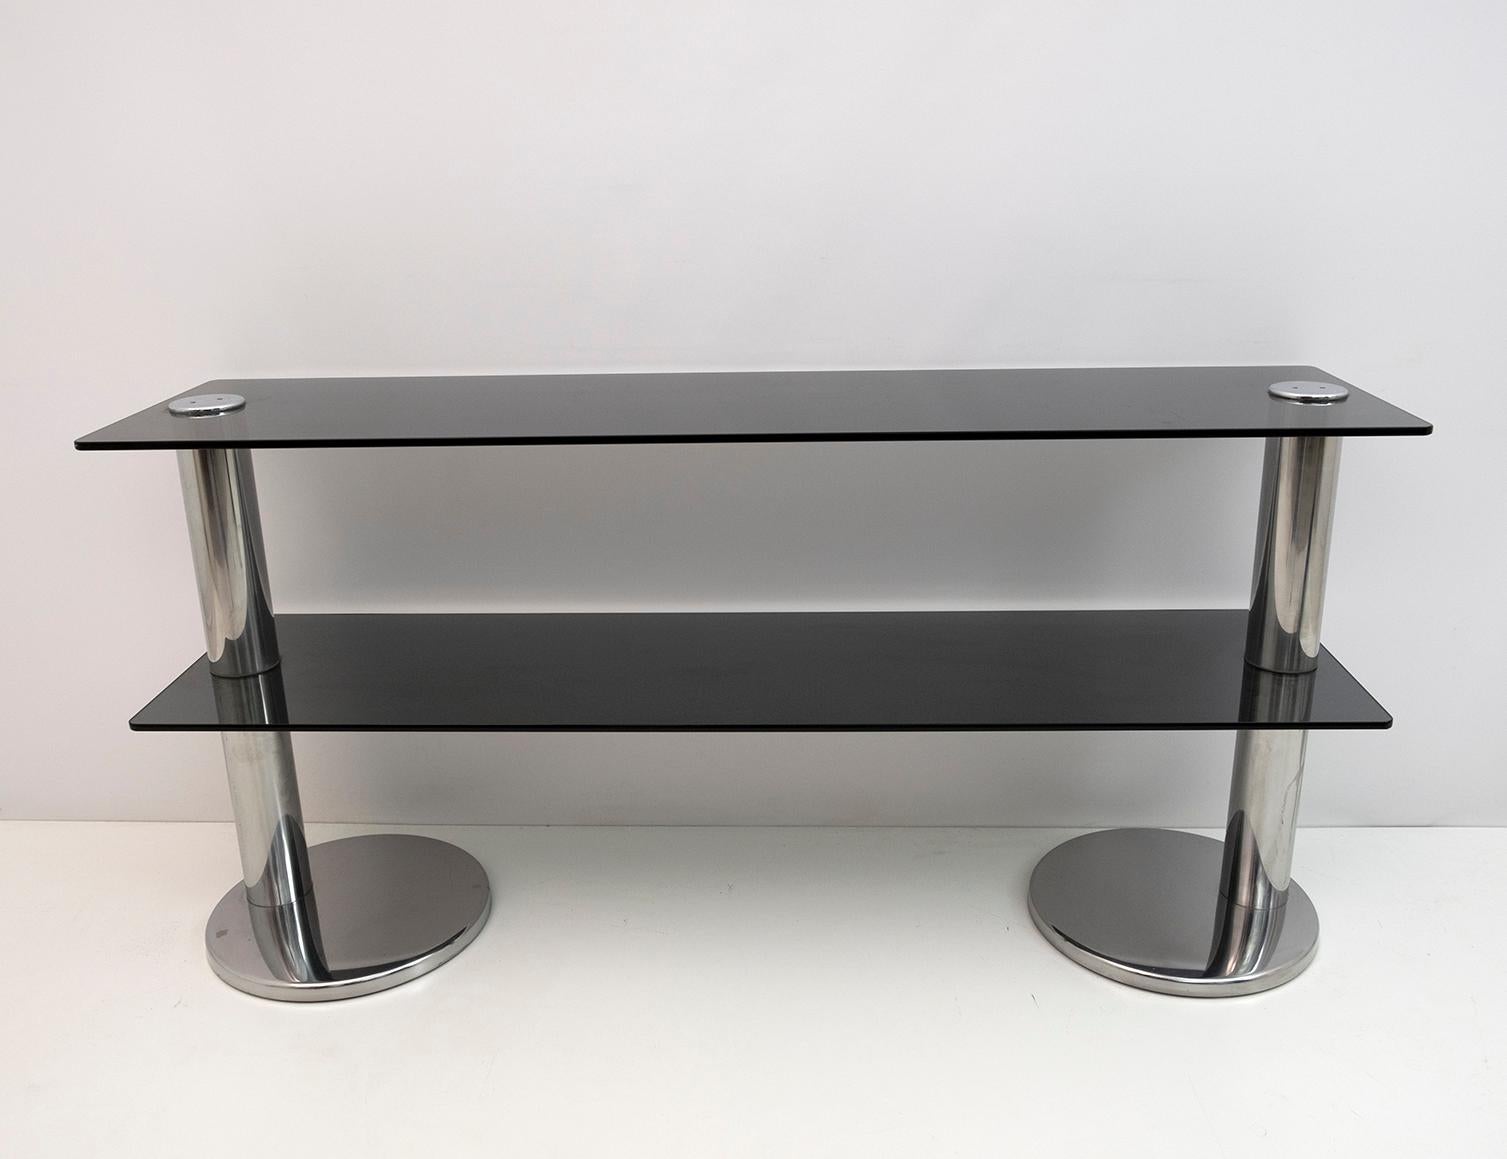 Italian console in smoked glass and steel, 1970s.
Chromed steel structure, with two round pedestals and two smoked glass tops.